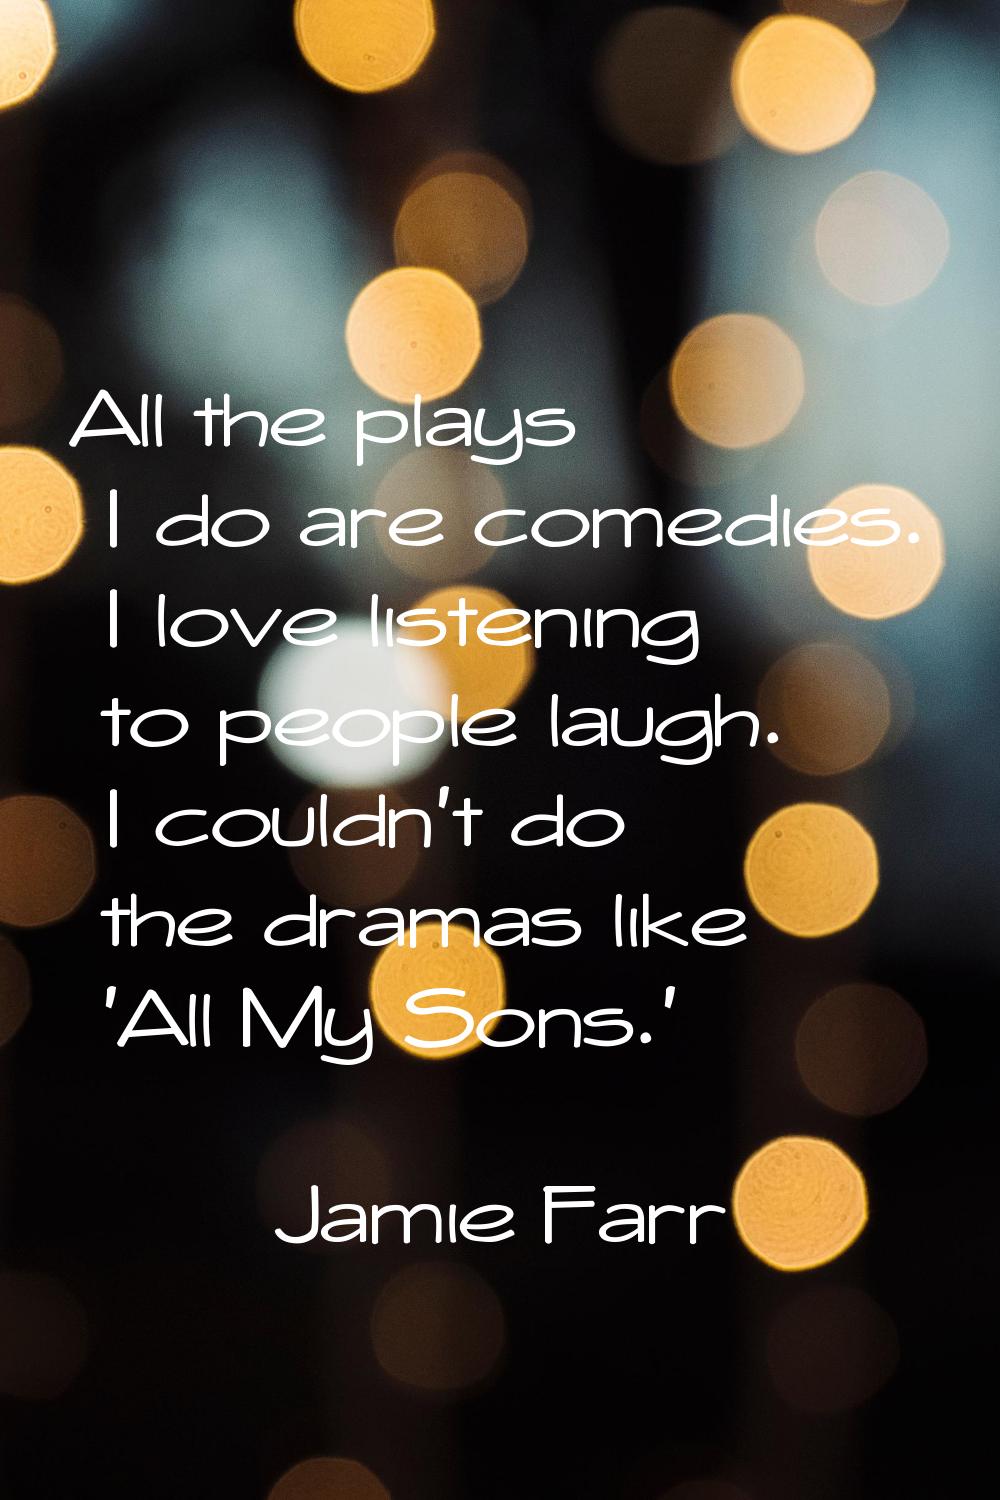 All the plays I do are comedies. I love listening to people laugh. I couldn't do the dramas like 'A